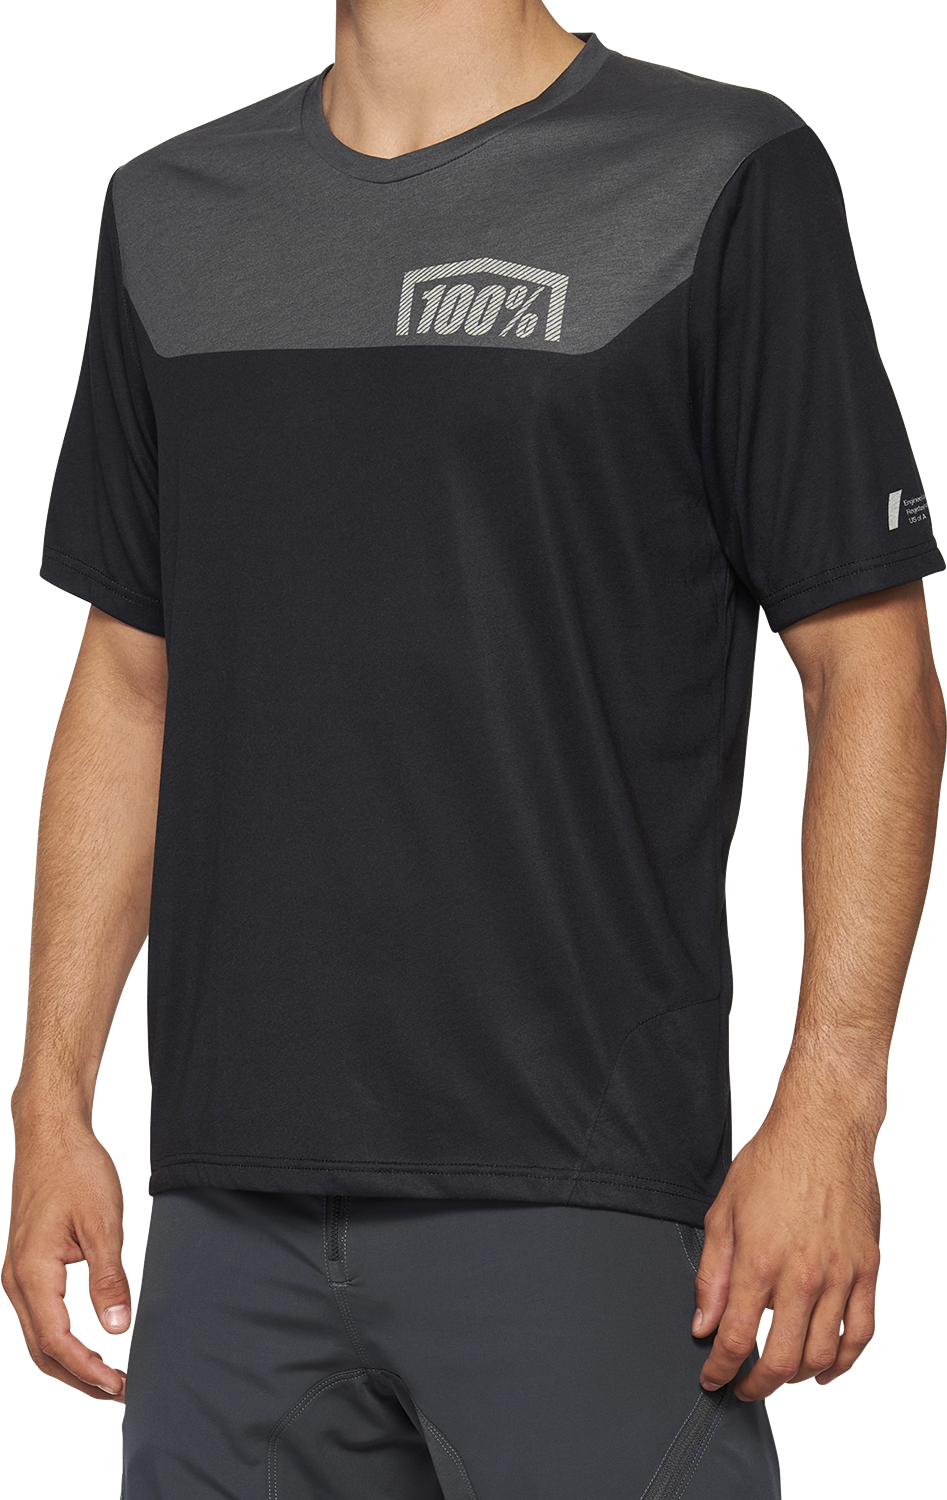 100% Airmatic Jersey - Short-Sleeve - Black/Charcoal - Small 40014-00000